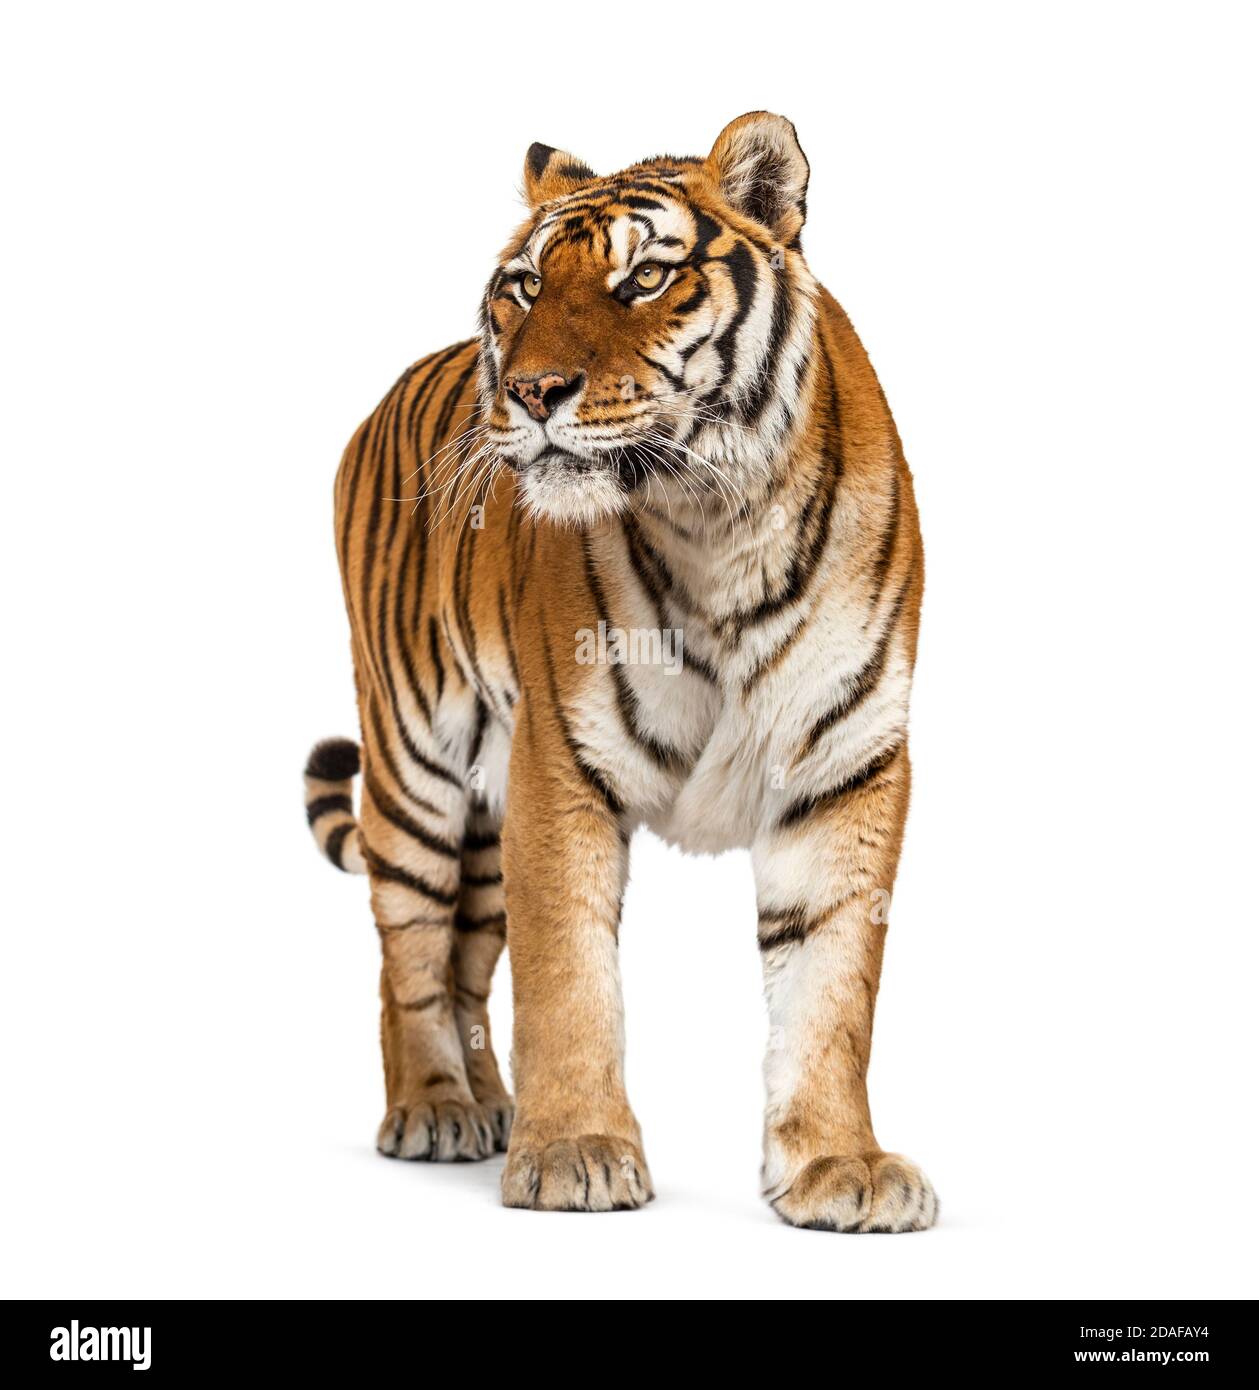 Tiger standing up in front of a white background Stock Photo